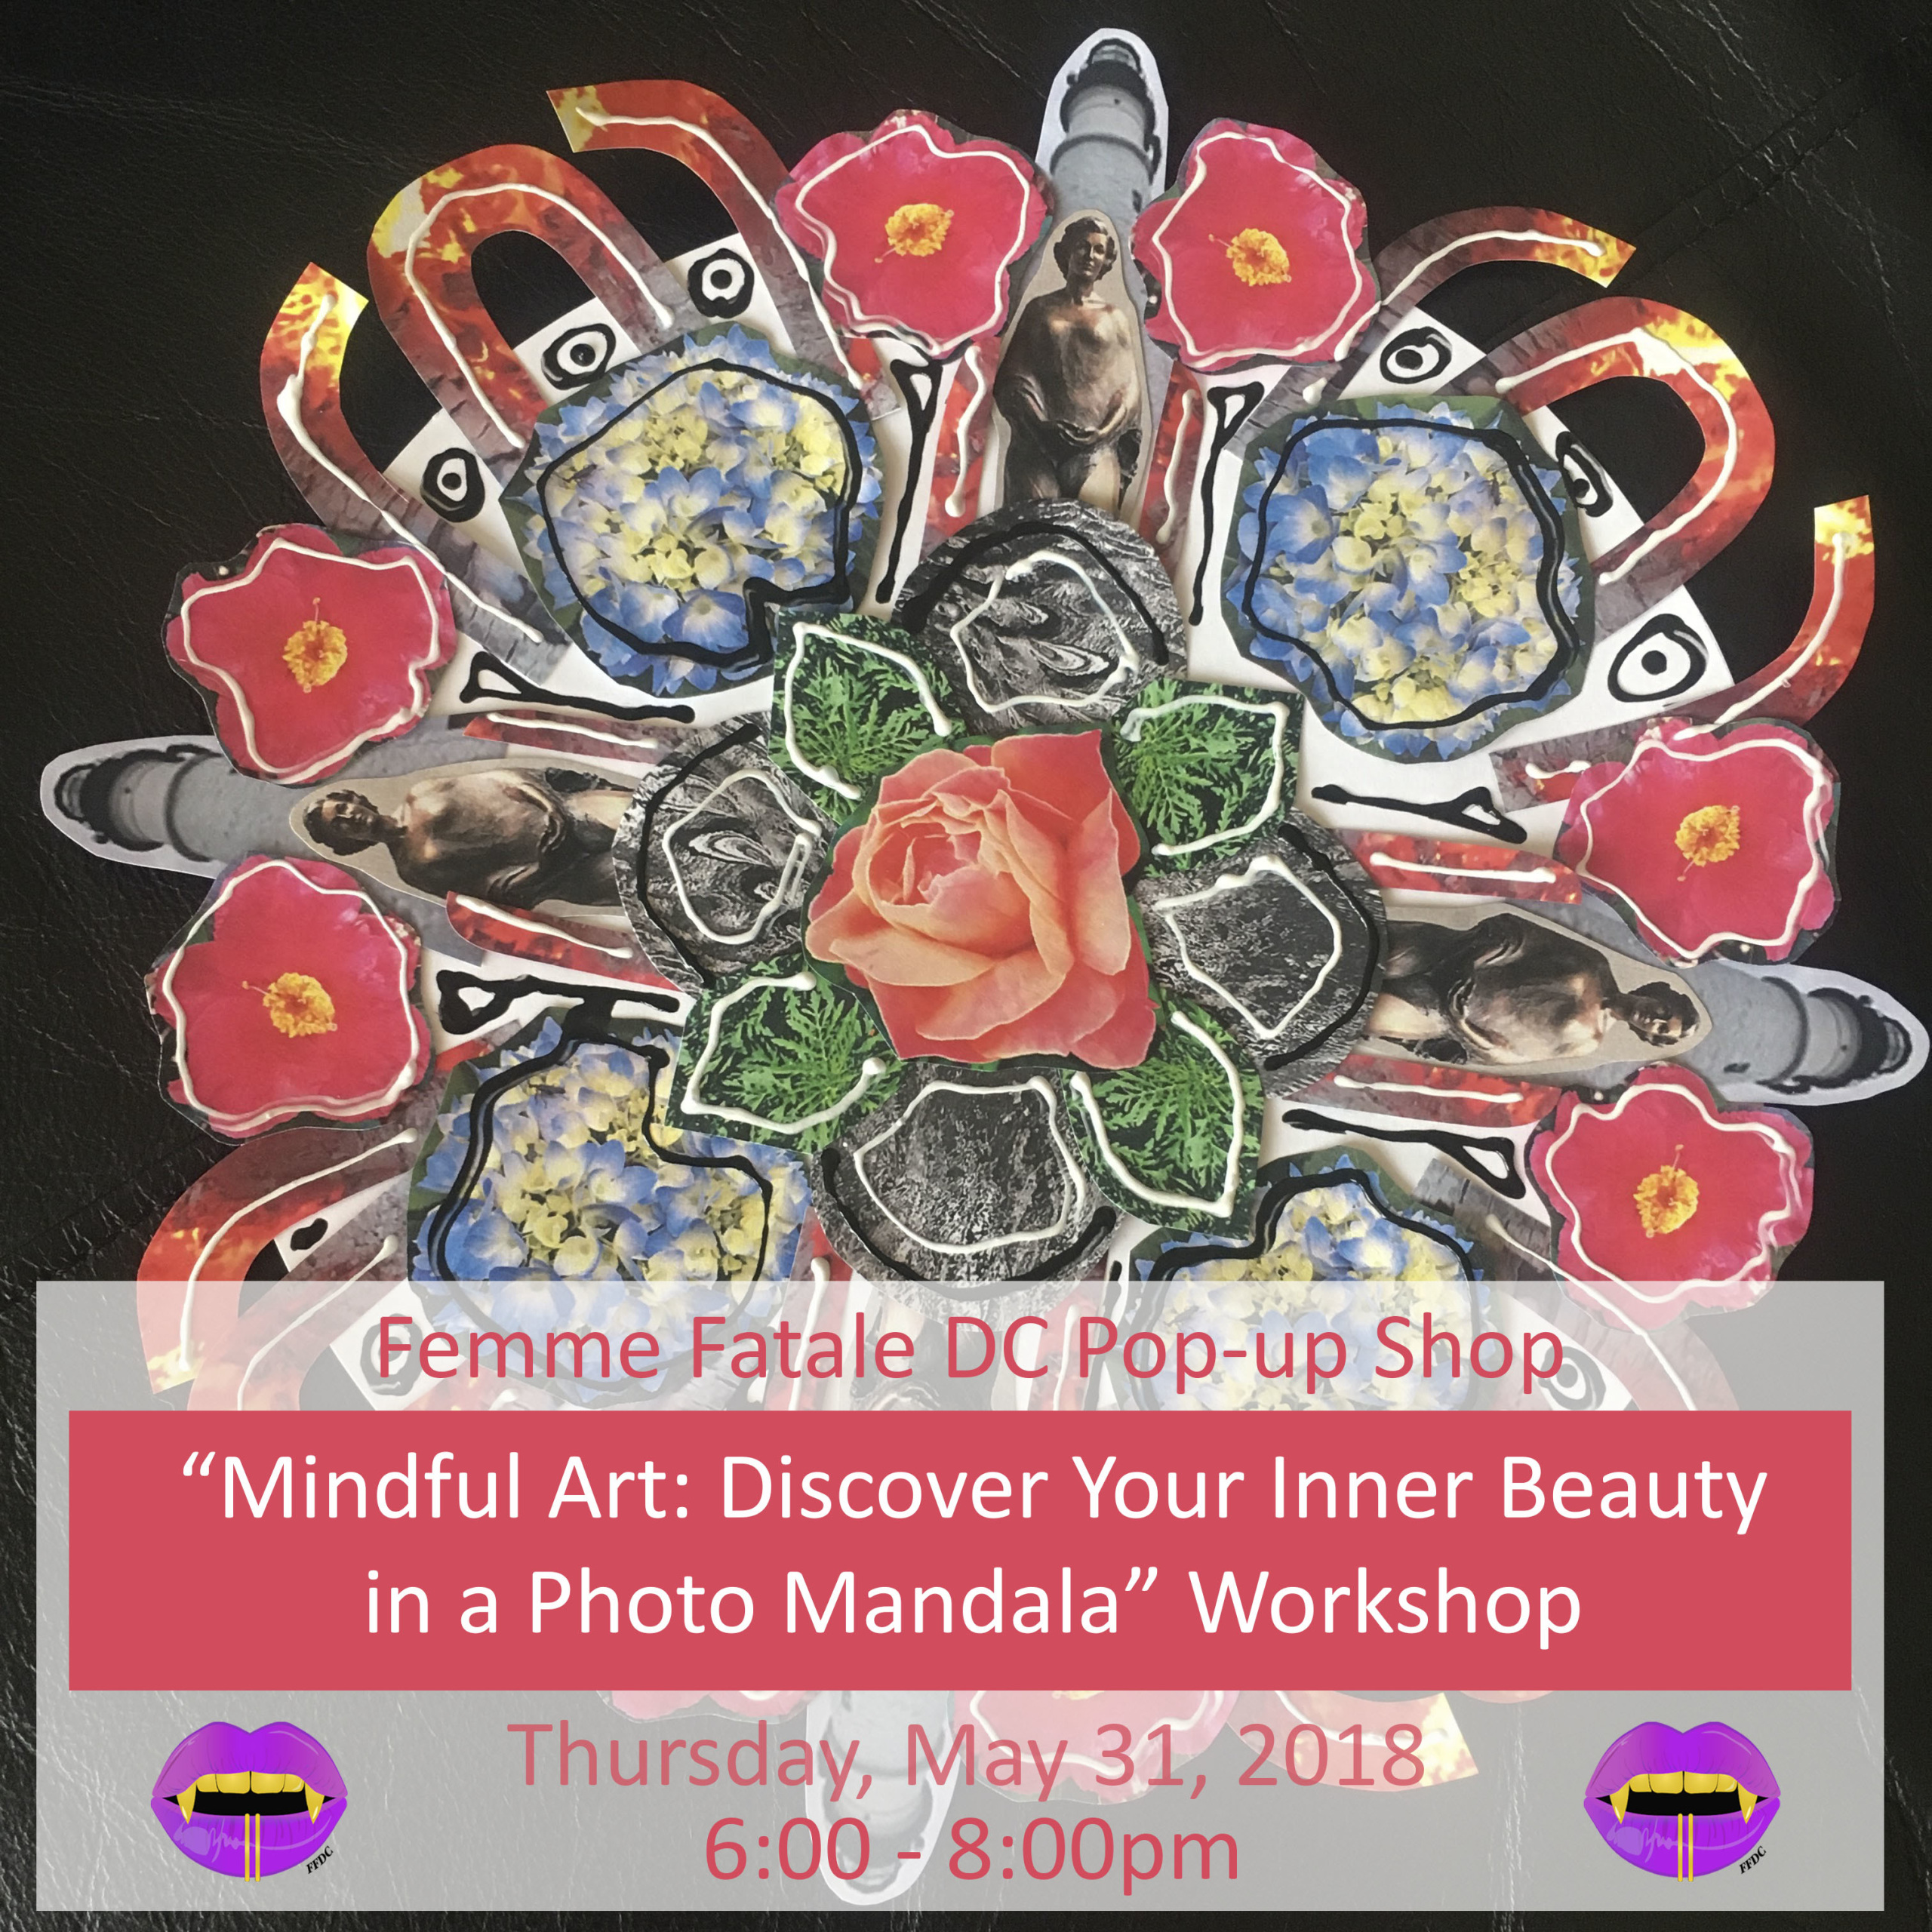 “Mindful Art: Discover Your Inner Beauty in a Photo Mandala” Workshop